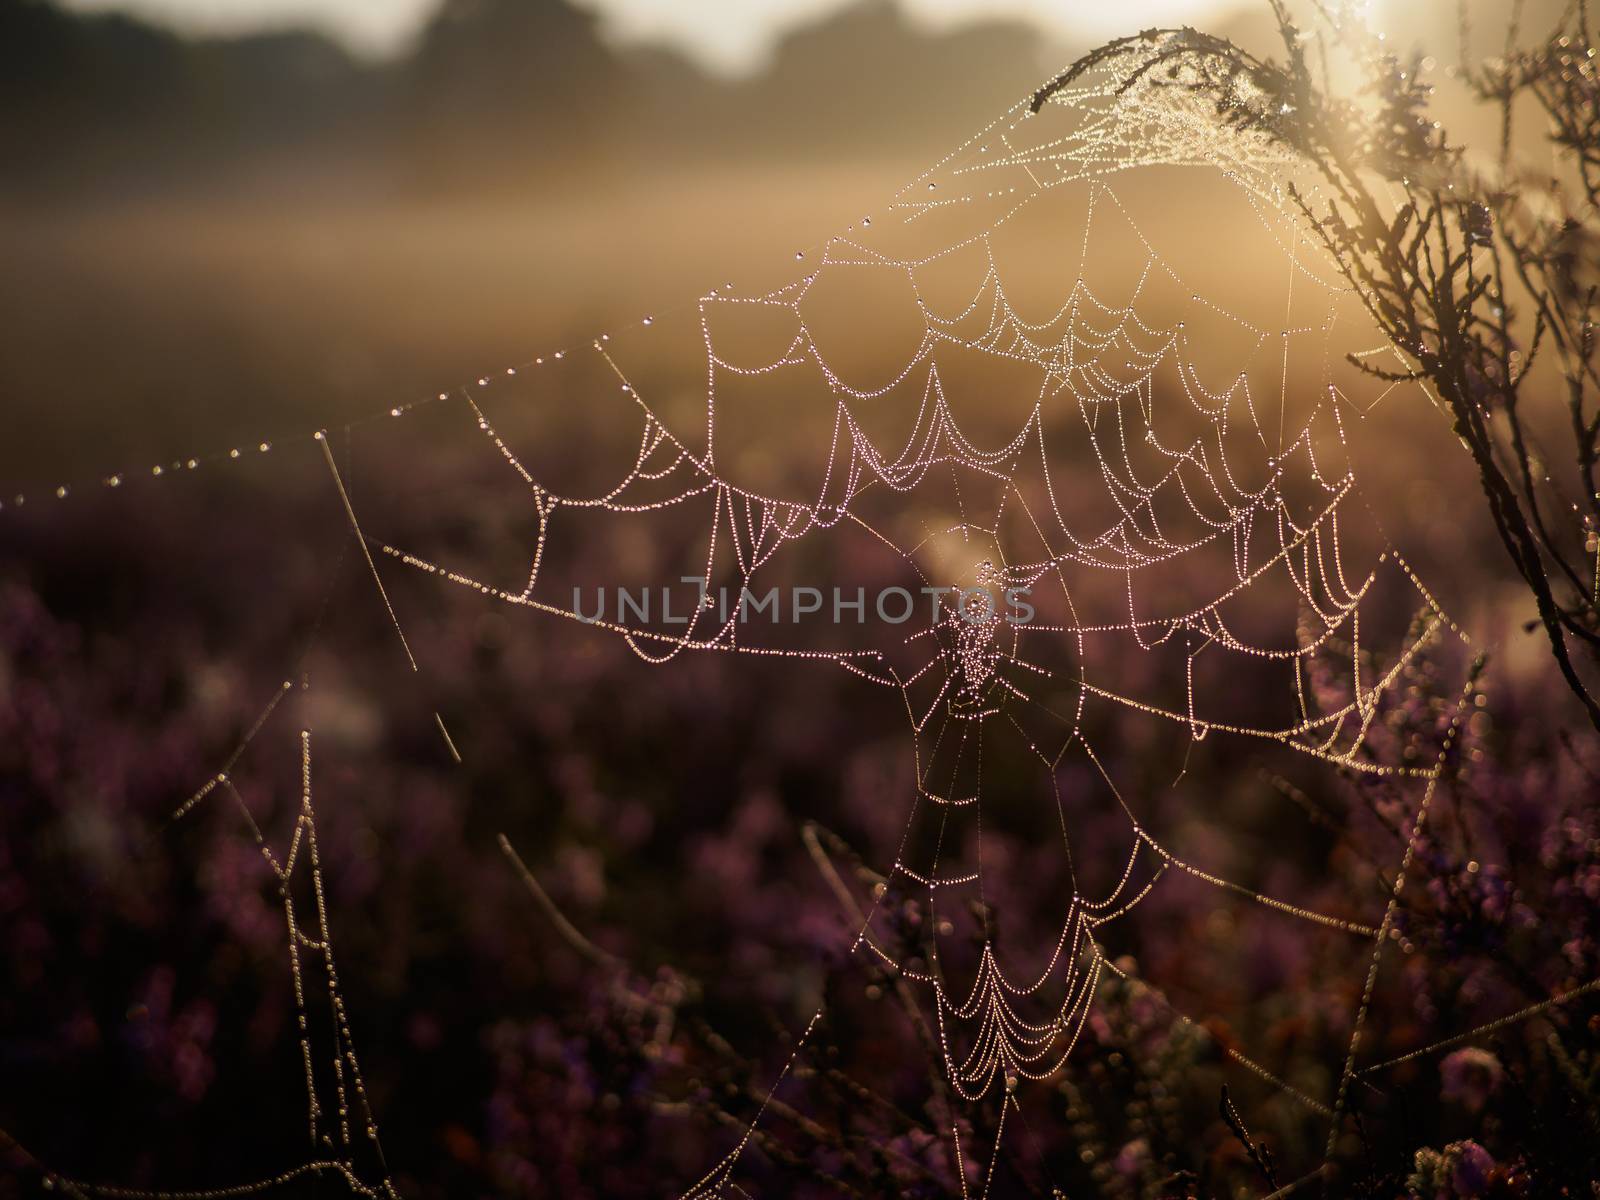 Damp spider web in early morning hazy sunset light